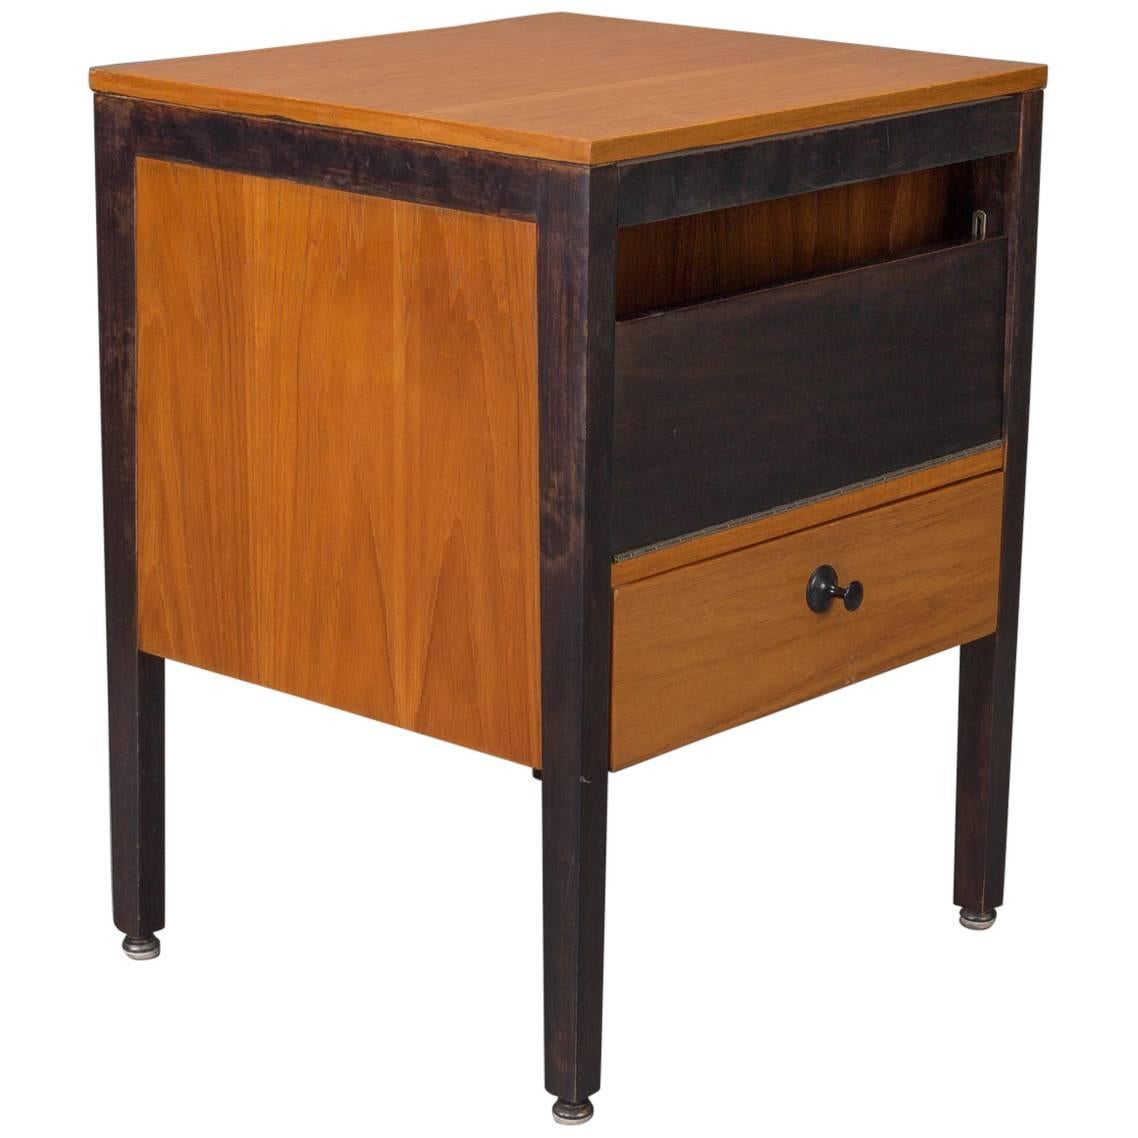 Small Steelframe Stereo Cabinet Side Table by George Nelson for Herman Miller